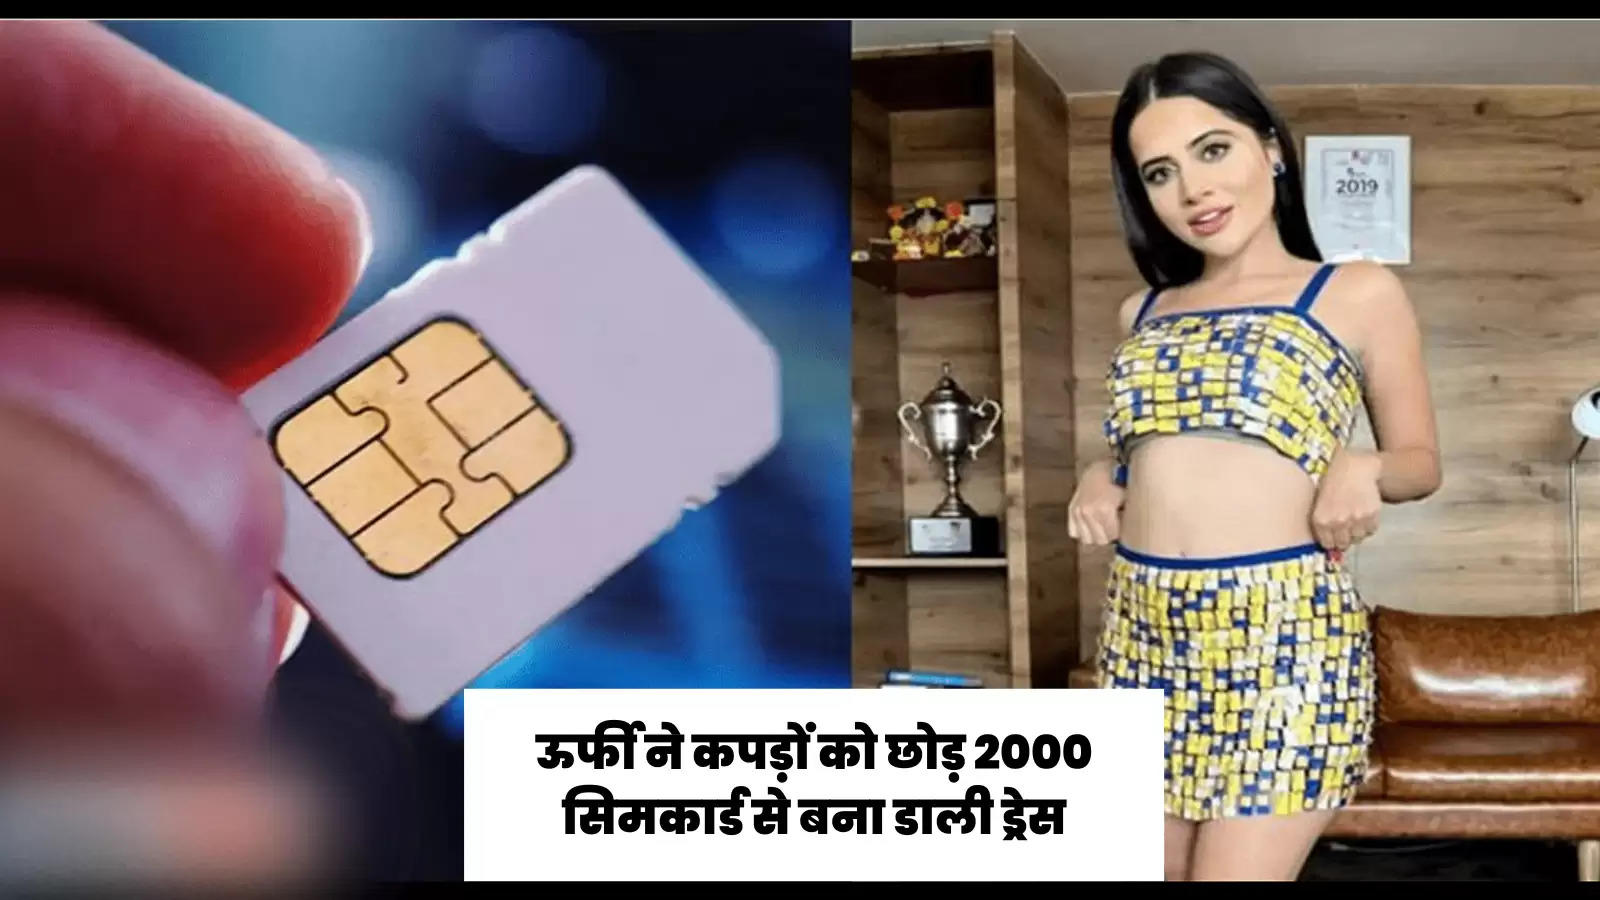 urfi-javed-sim-cards-outfit-picture-goes-vira